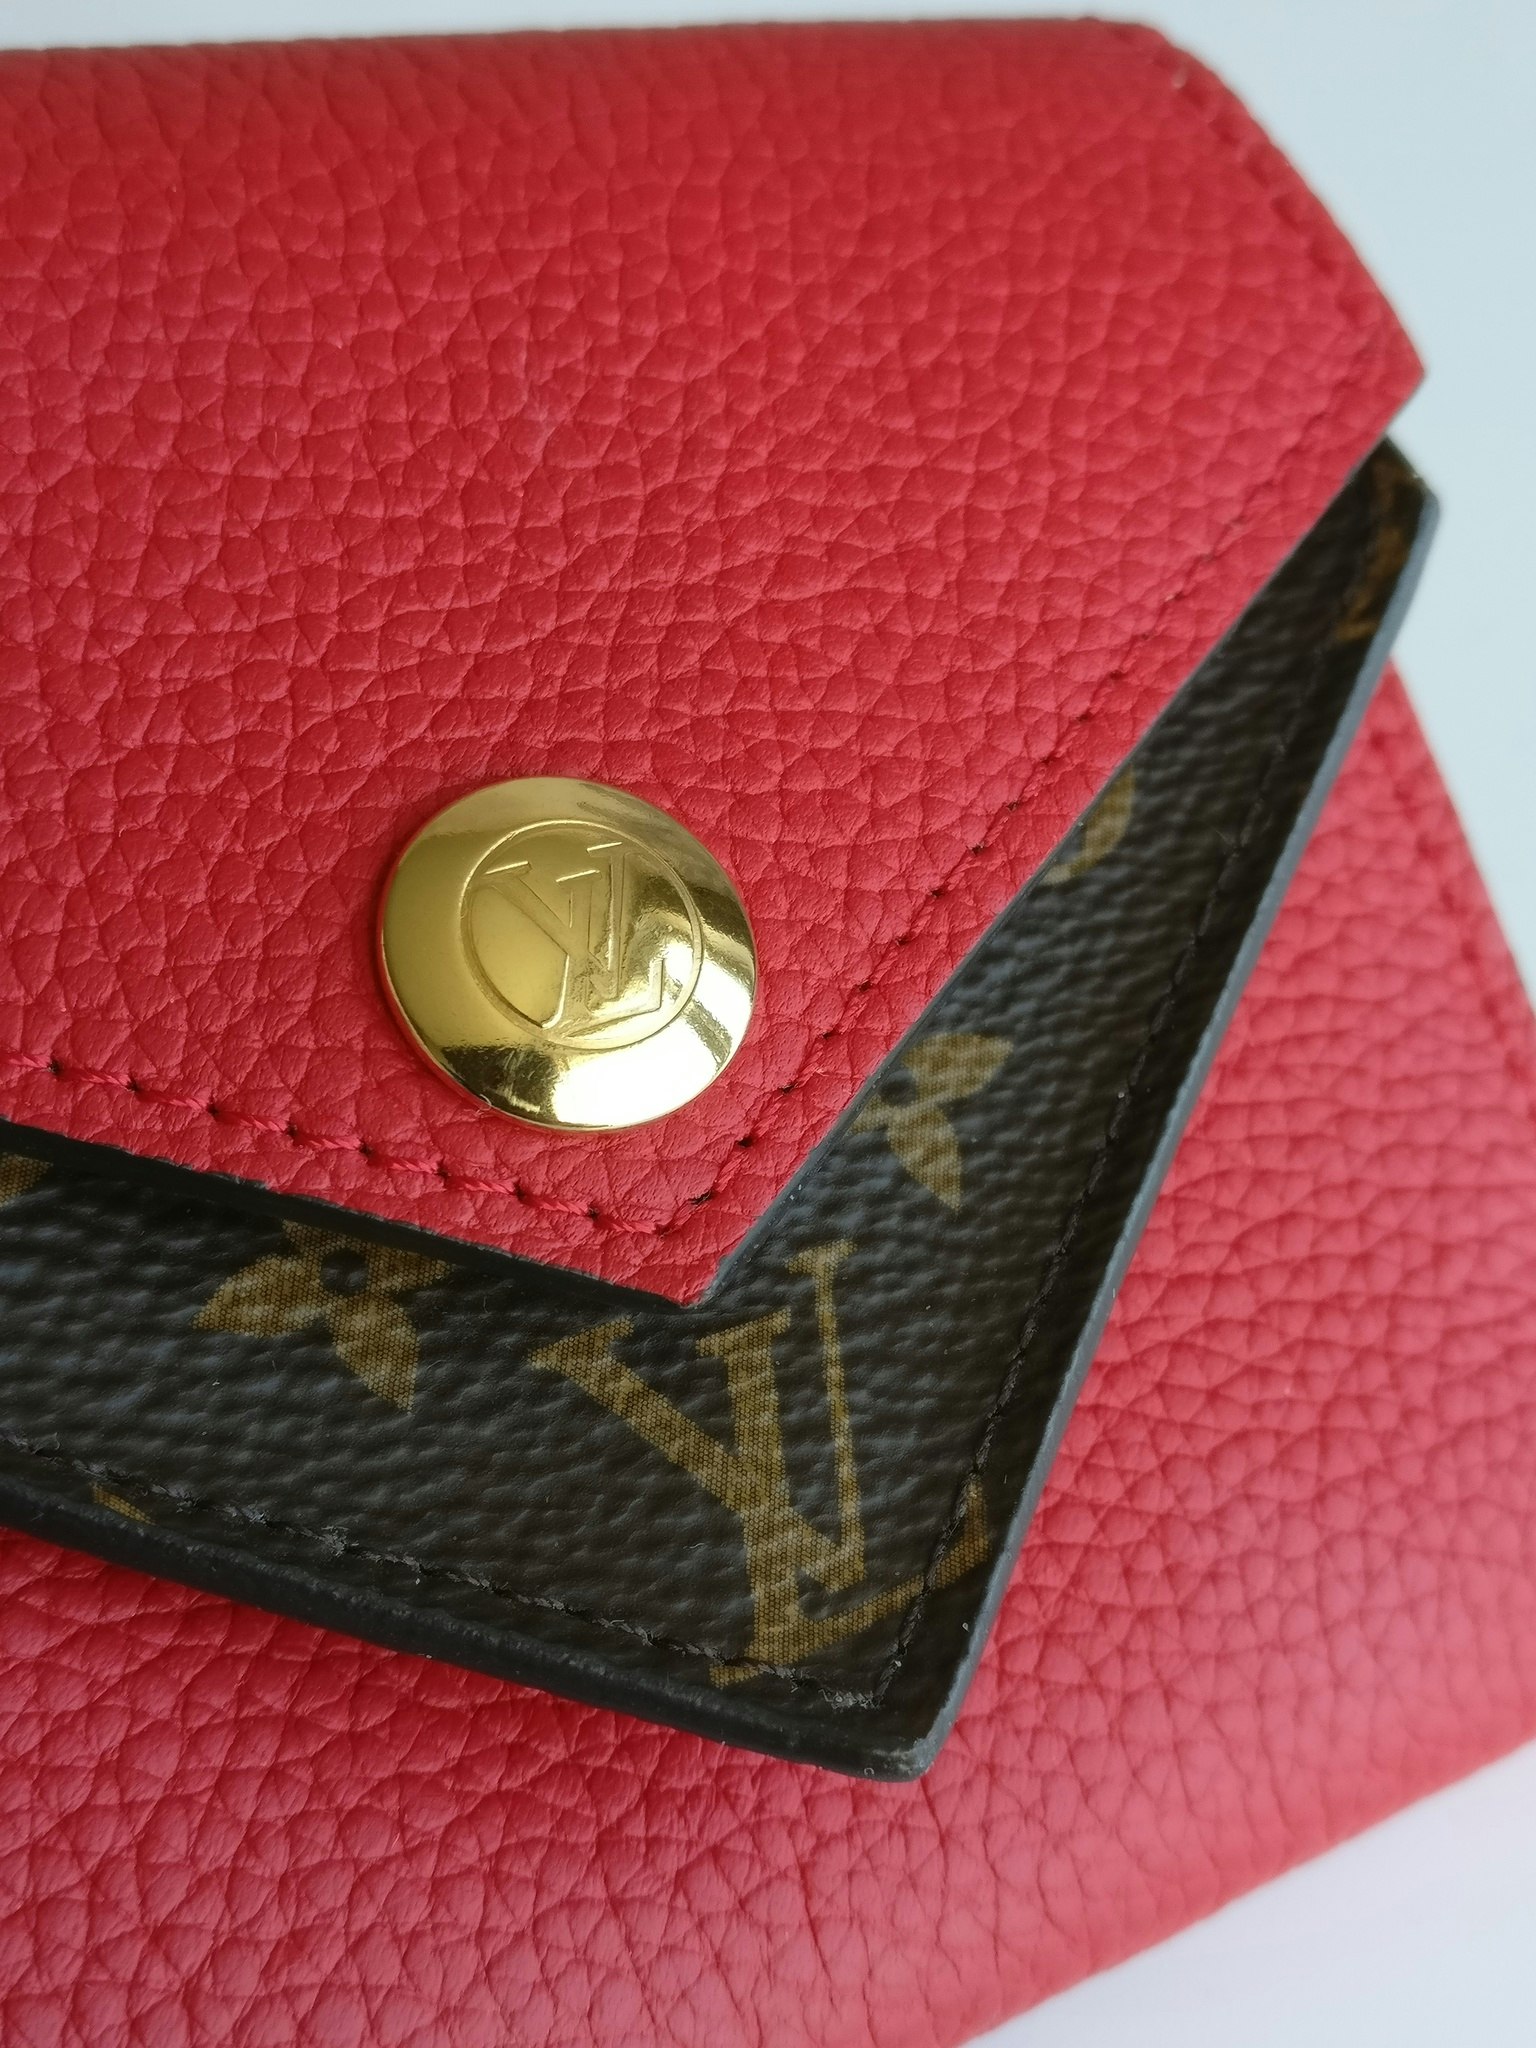 Louis Vuitton Double V Wallet Red